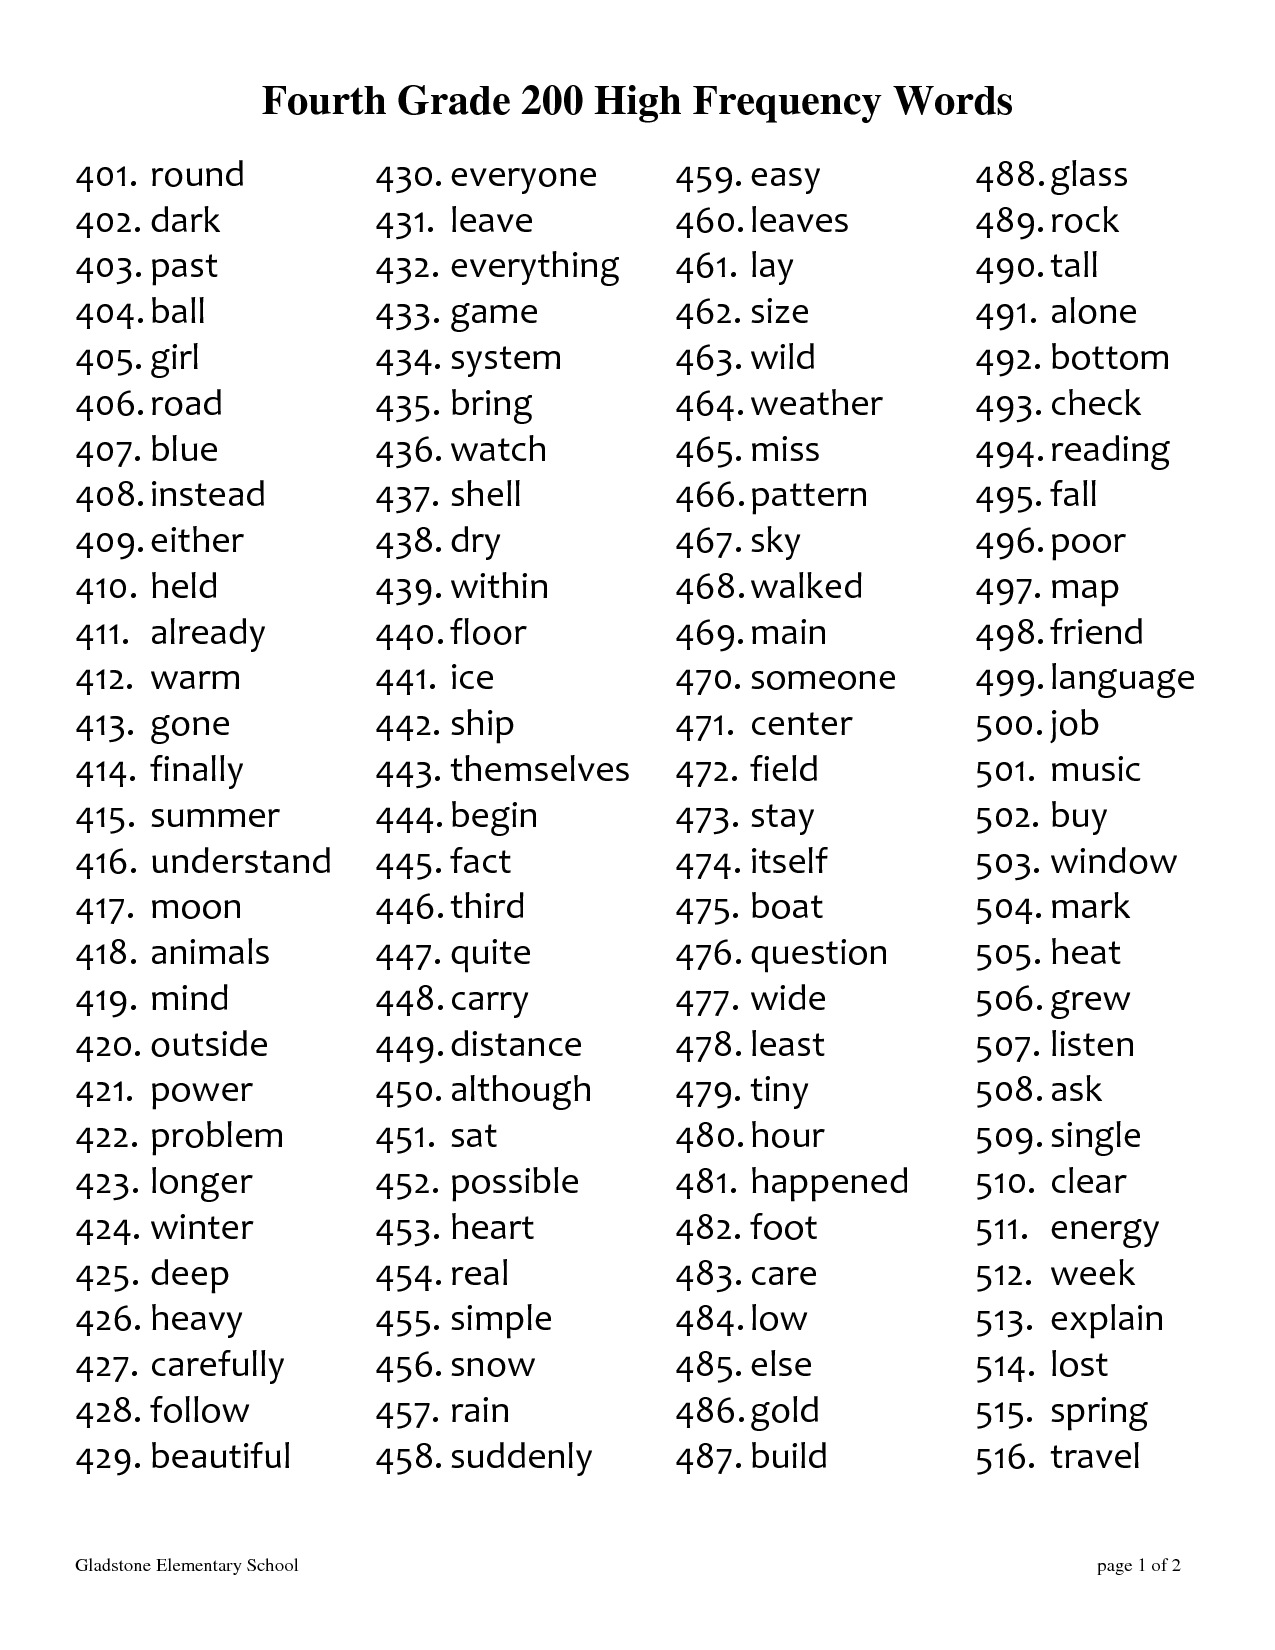 17-best-images-of-fourth-grade-words-printable-worksheets-third-grade